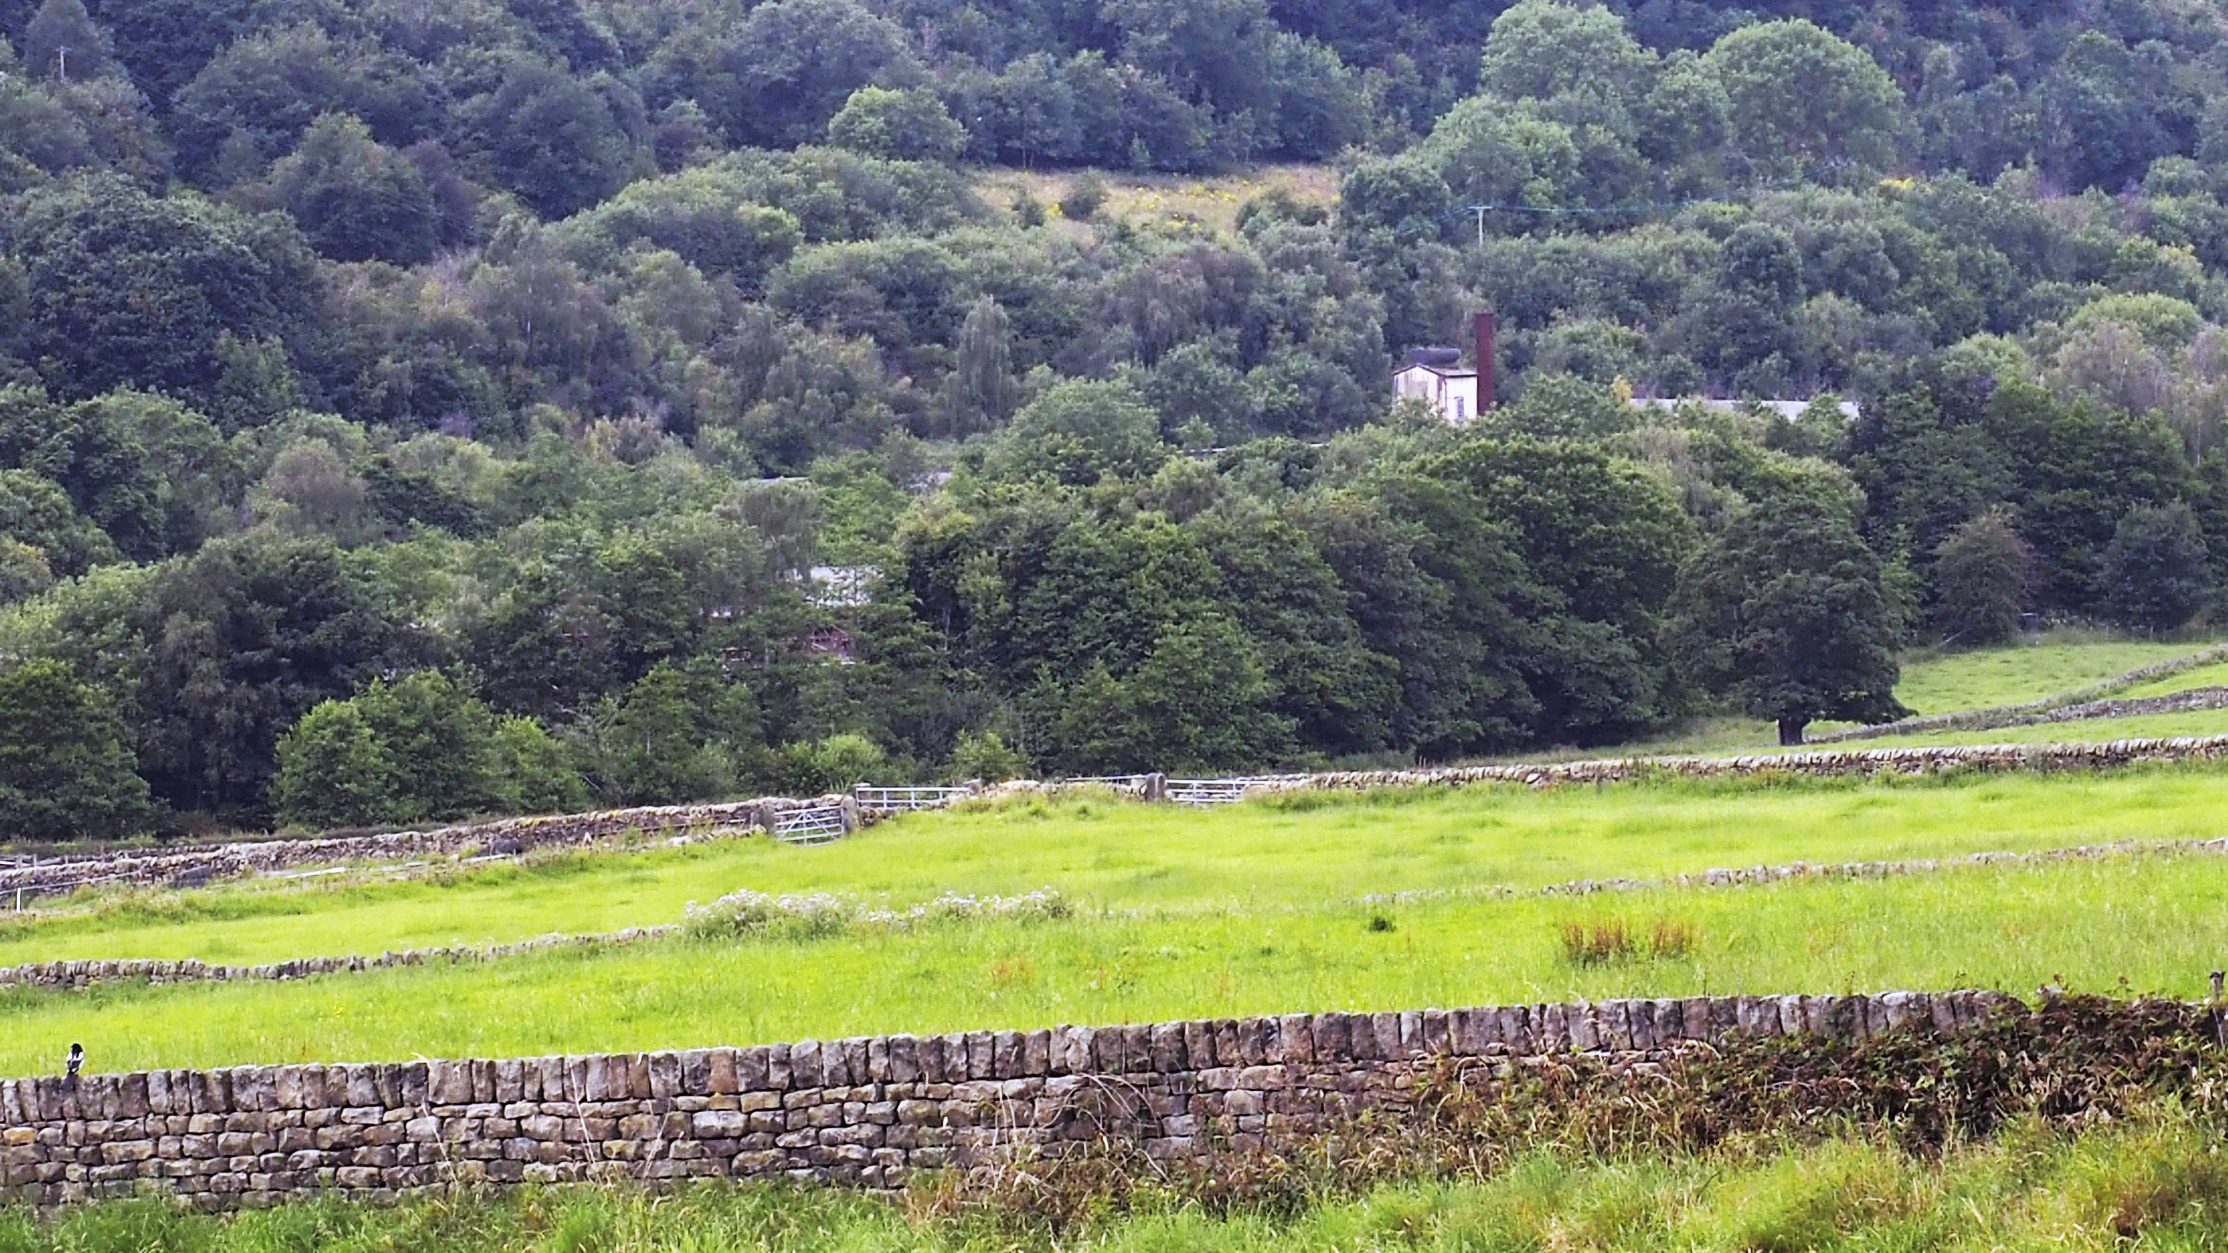 A new township is the wrong solution for the Loxley valley – our case to the planning inquiry